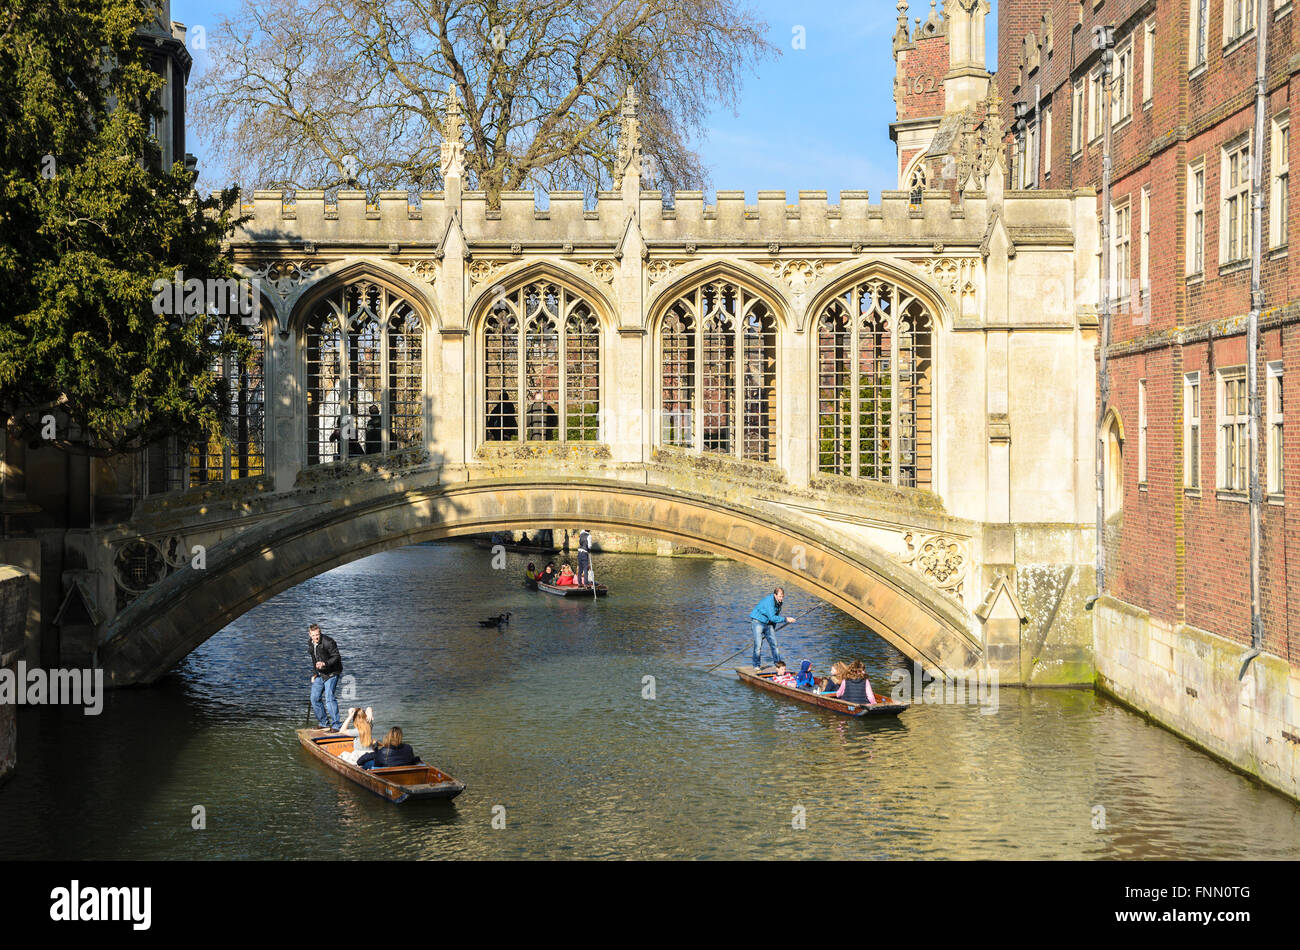 The bridge commonly known as the 'Bridge of Sighs' over the River Cam, St Johns College, Cambridge, England, UK. Stock Photo